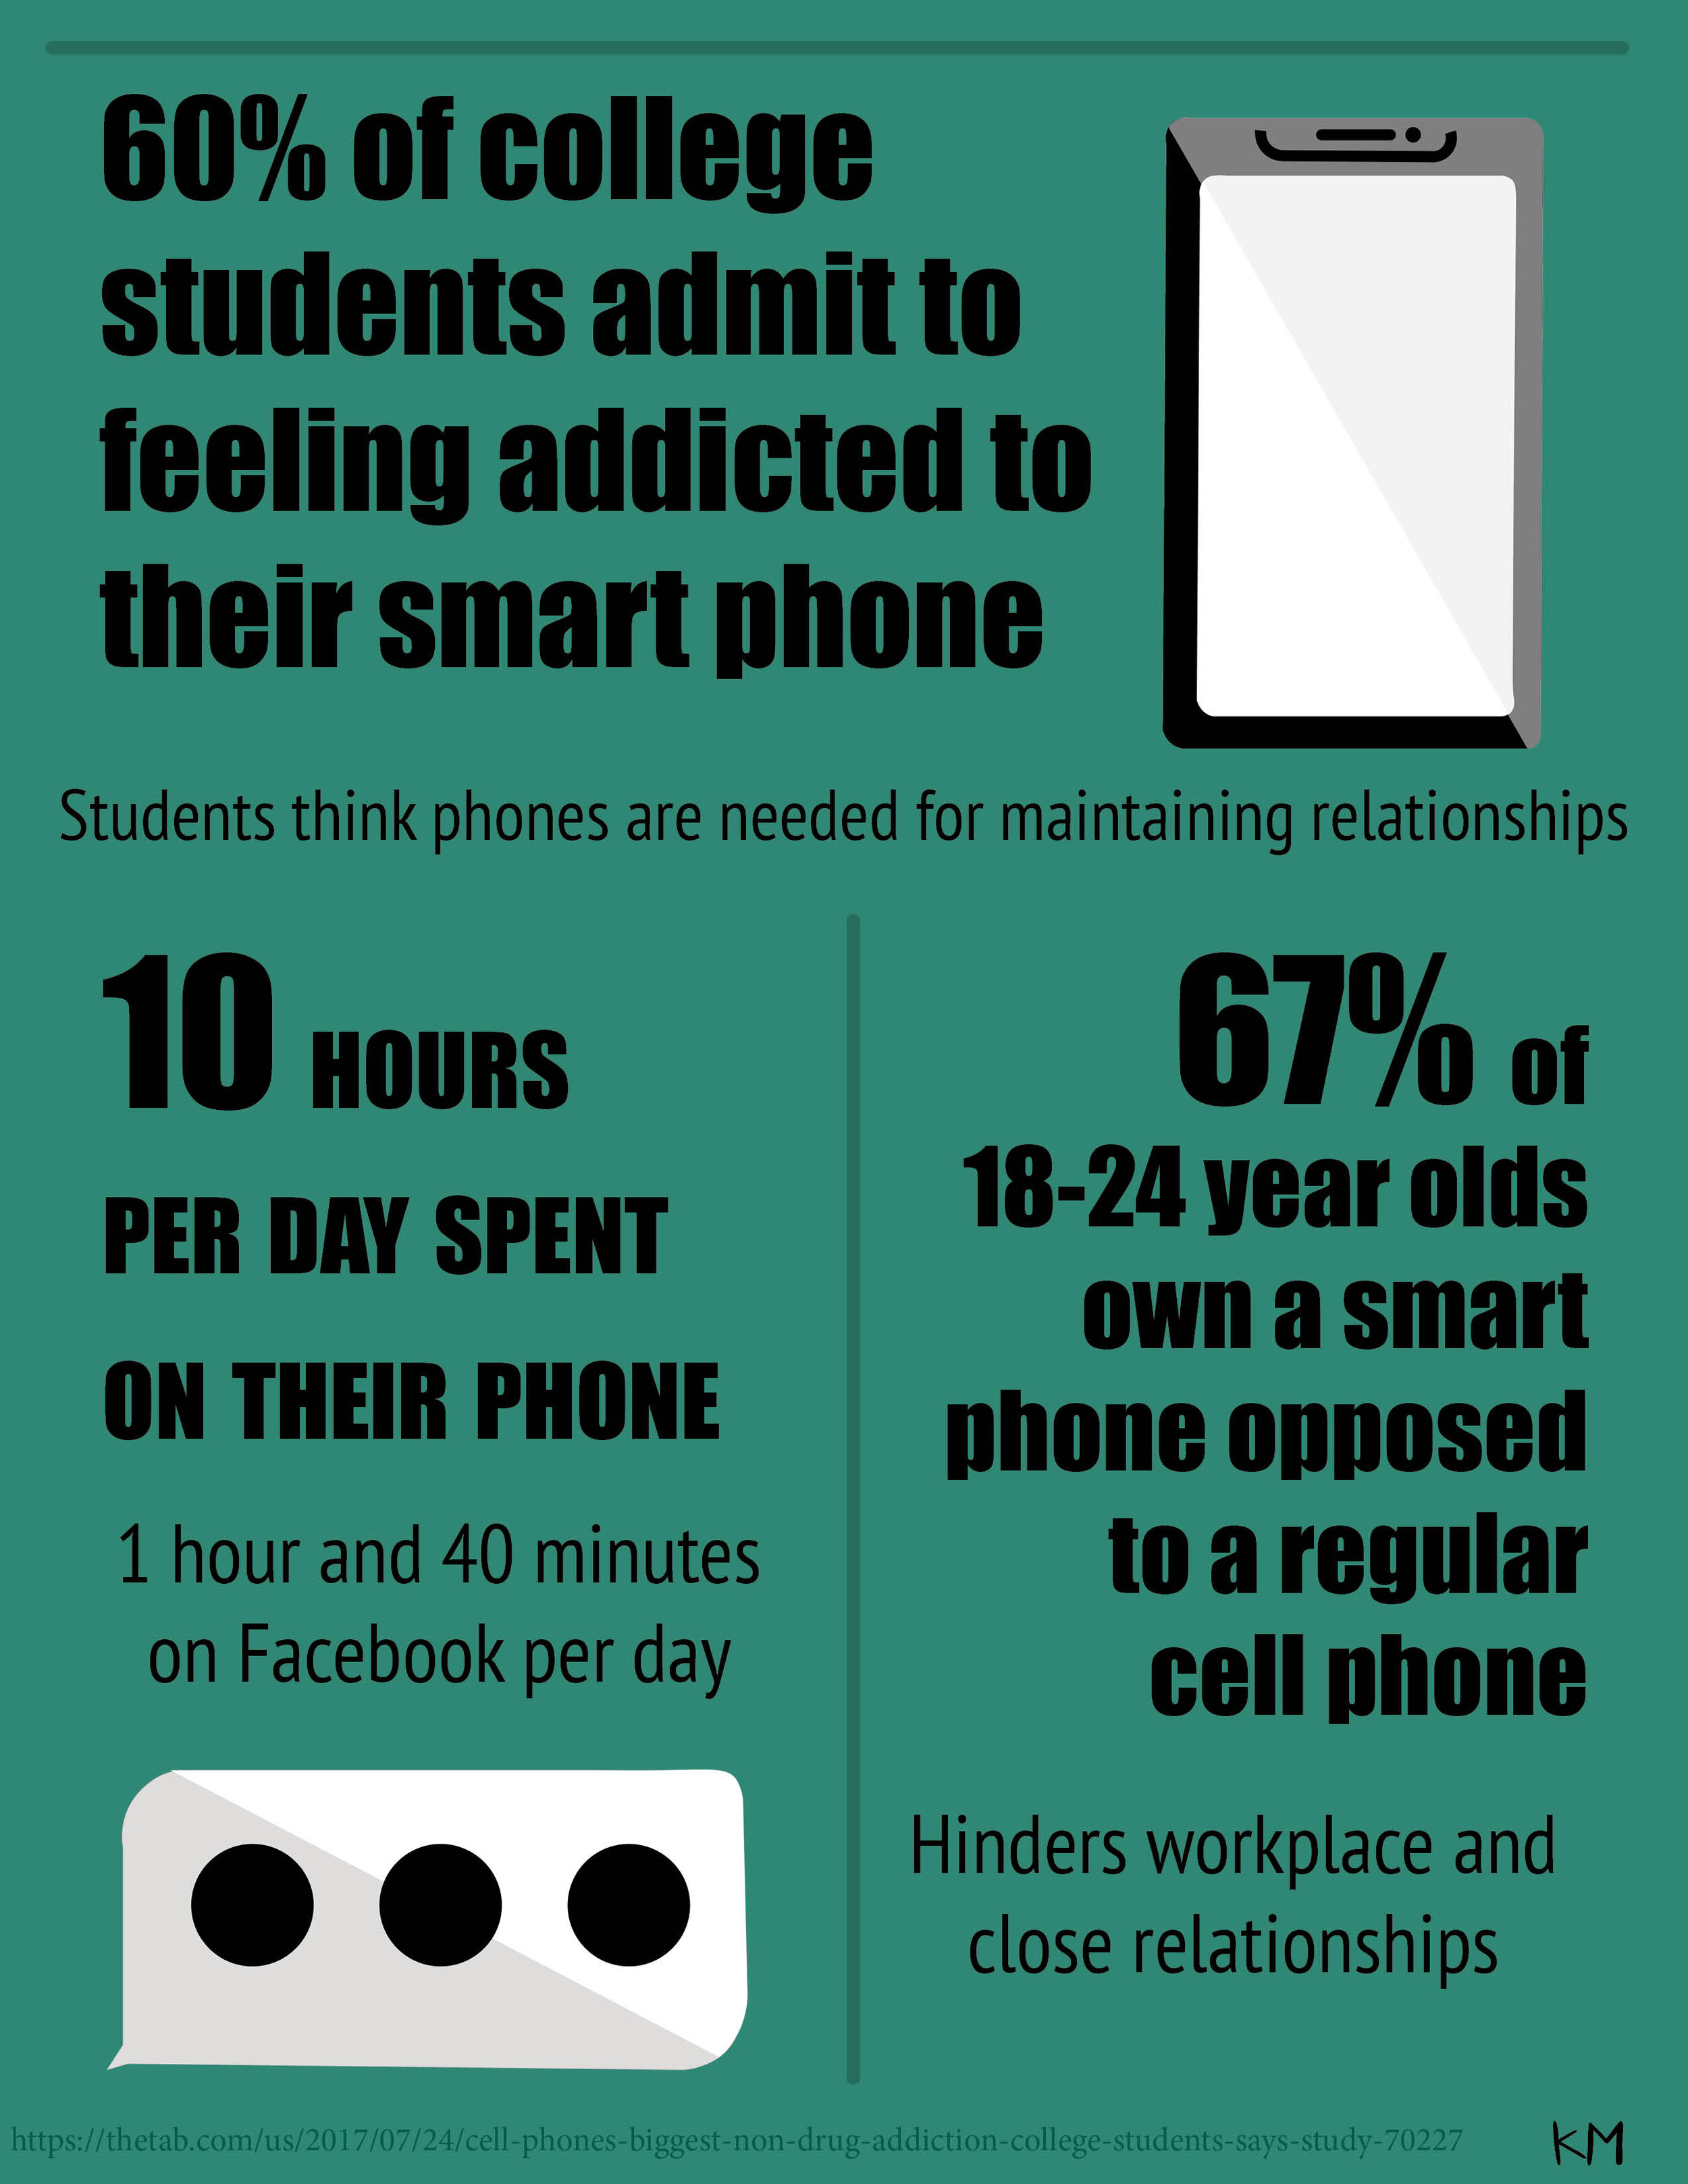 How much time do we actually spend on our smart phones? Take a look at the usage of smart phones by college students.